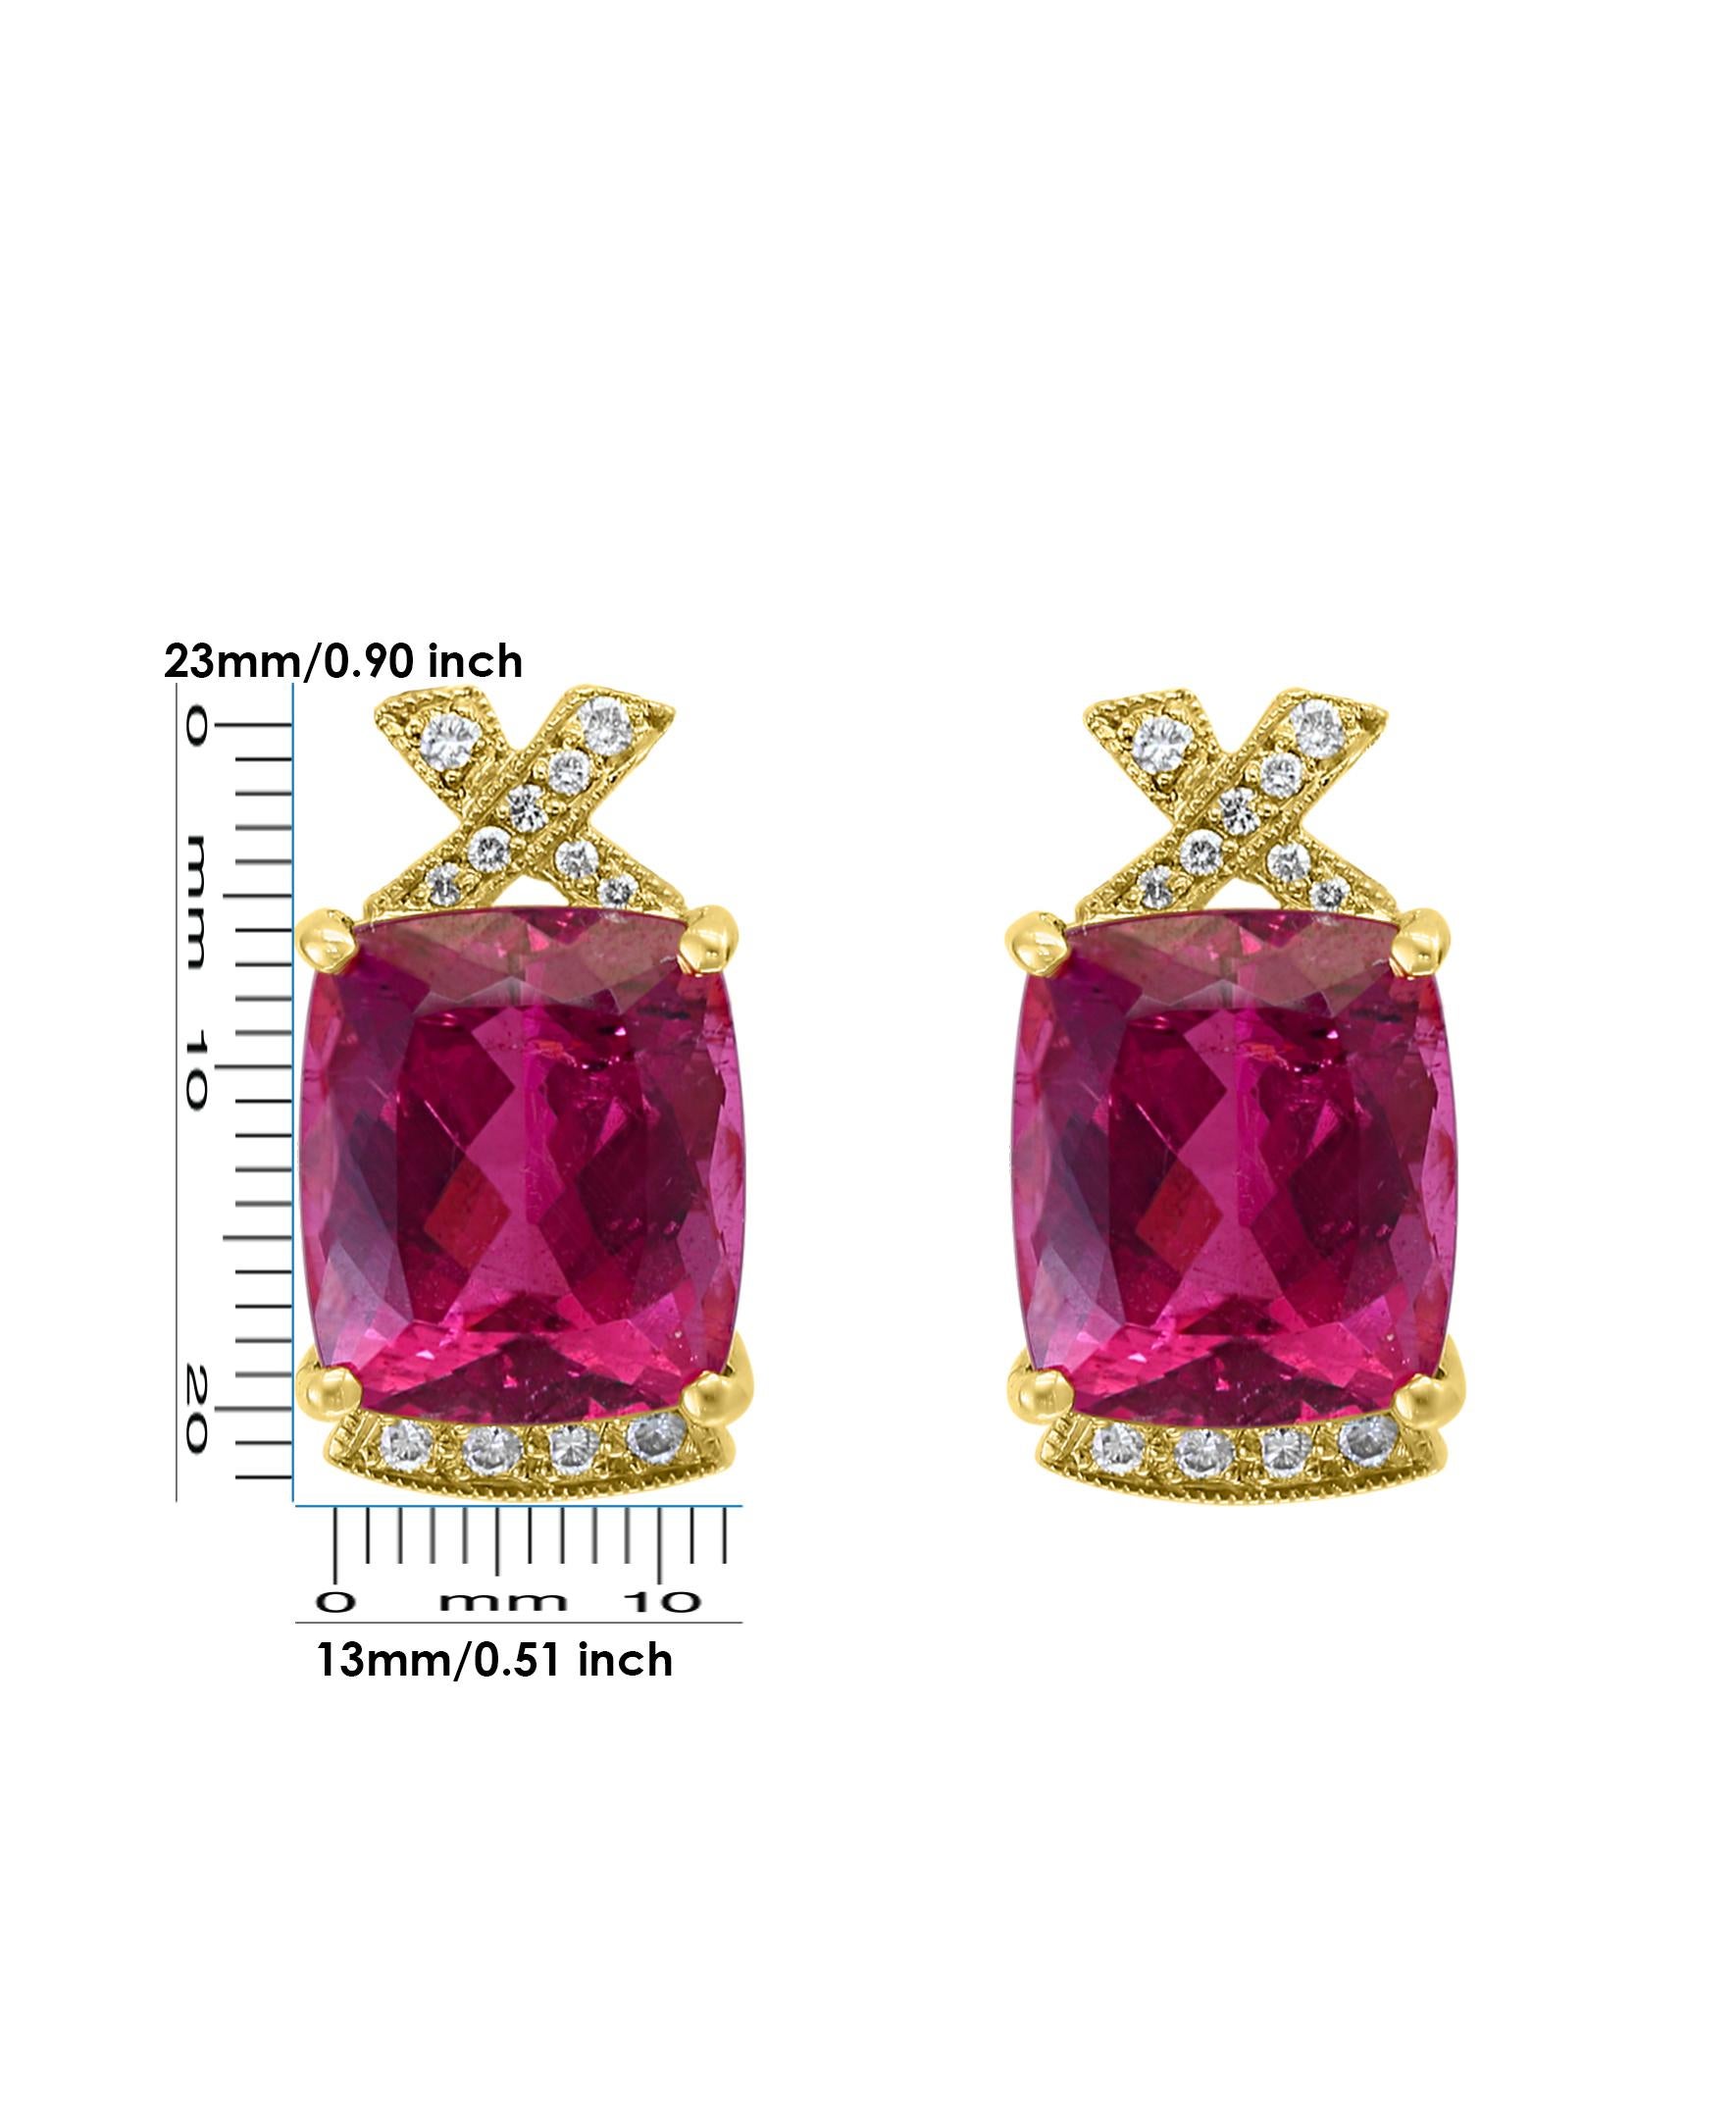 19 Carat Natural Pink Tourmaline and Diamond Cocktail Earring, 14 Karat Gold In Excellent Condition For Sale In New York, NY